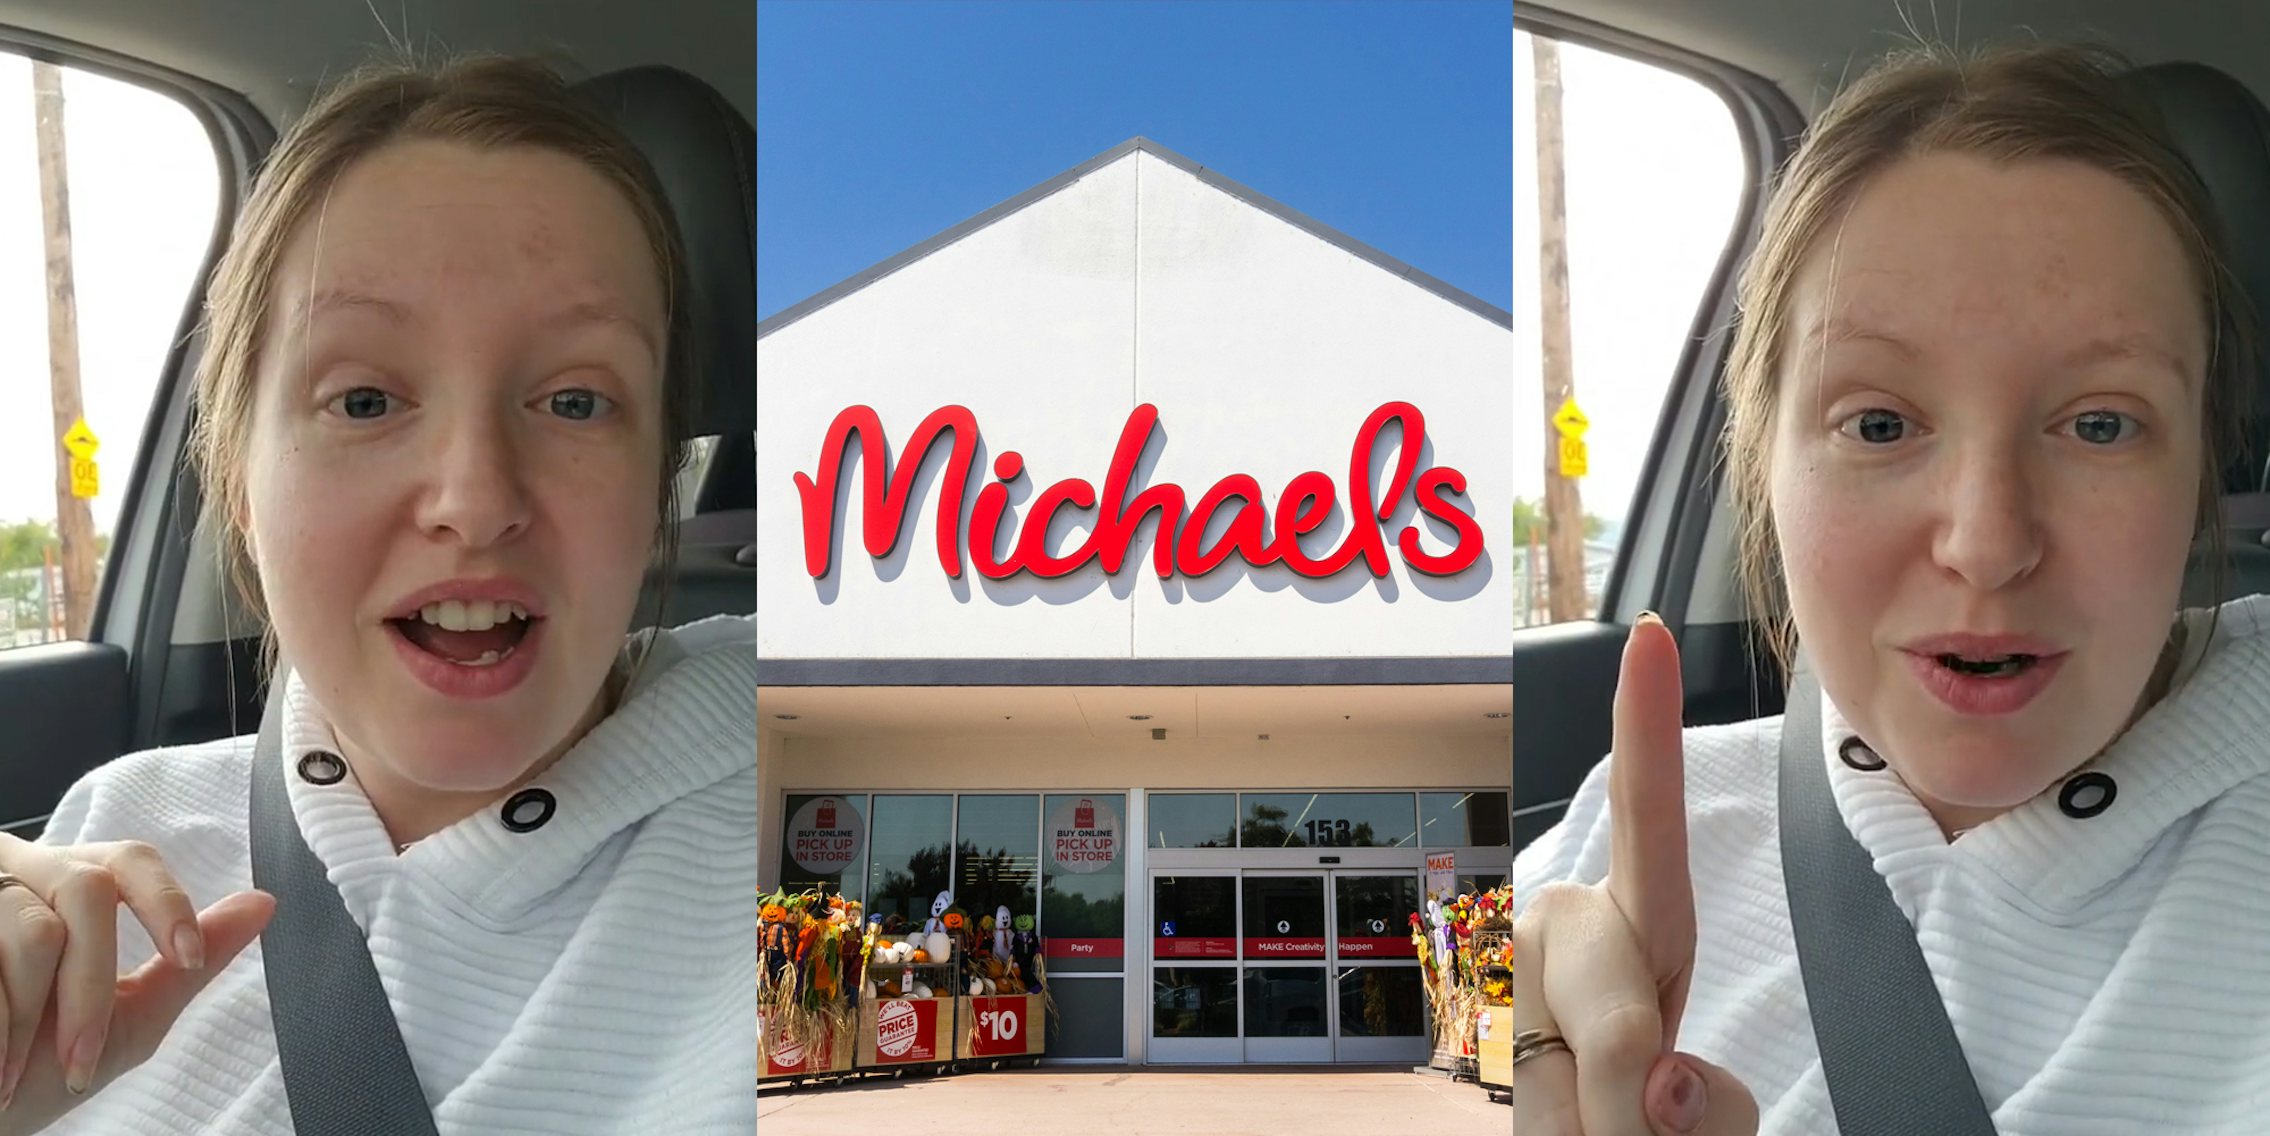 Michaels craft store says racial slur not arranged by employee